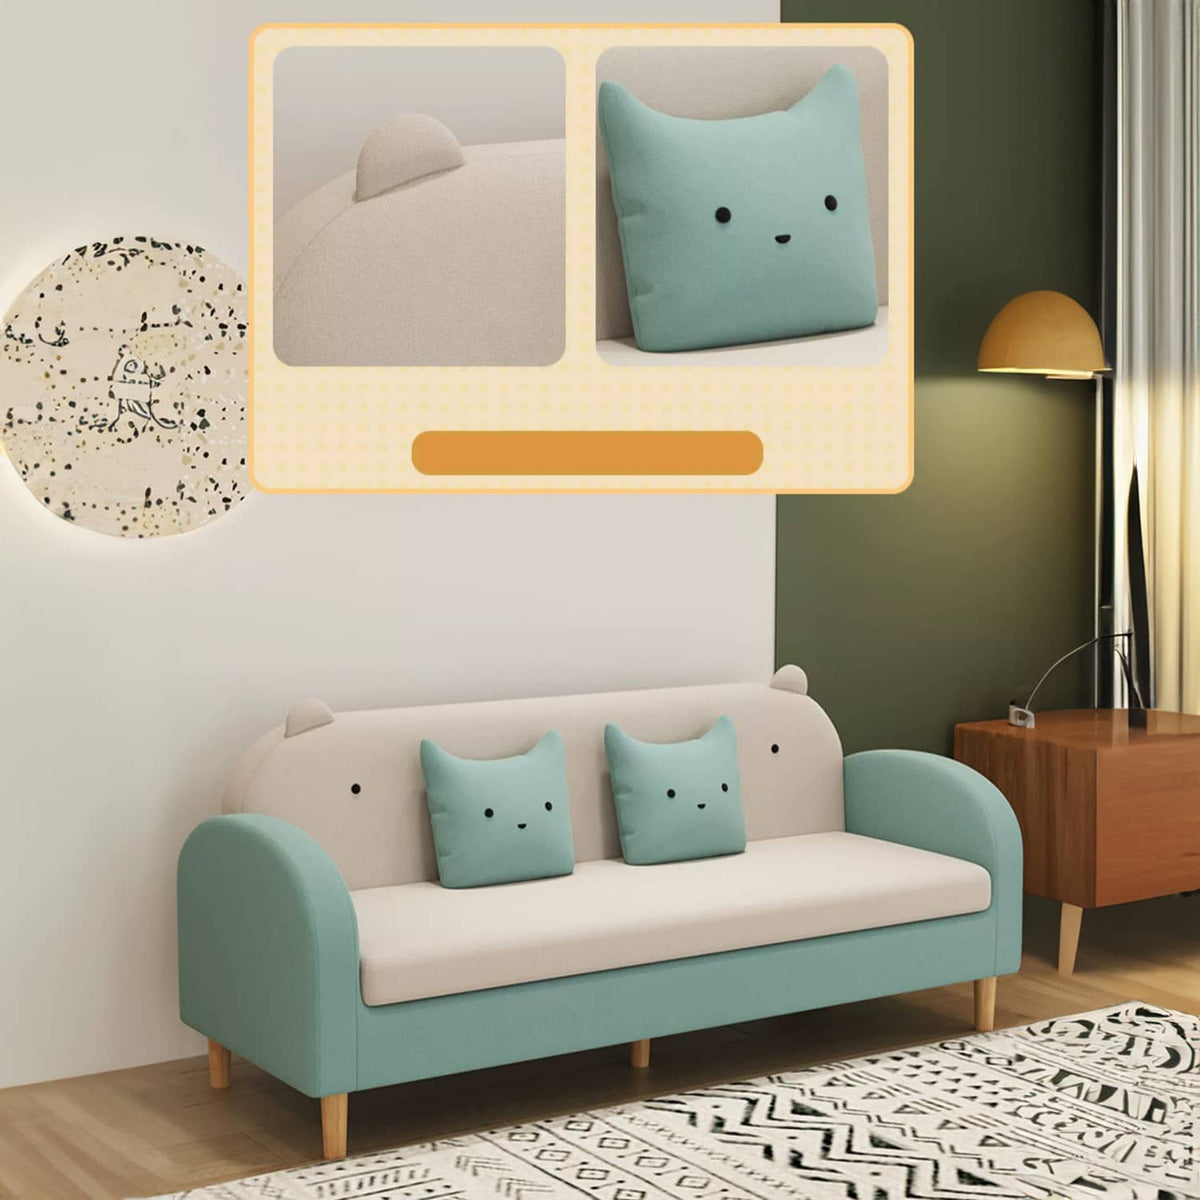 Stylish Light Gray Sofa with Off White, Mint Green, Grass Pink, and Yellow Wood Accents – Premium Cotton Upholstery qm-11